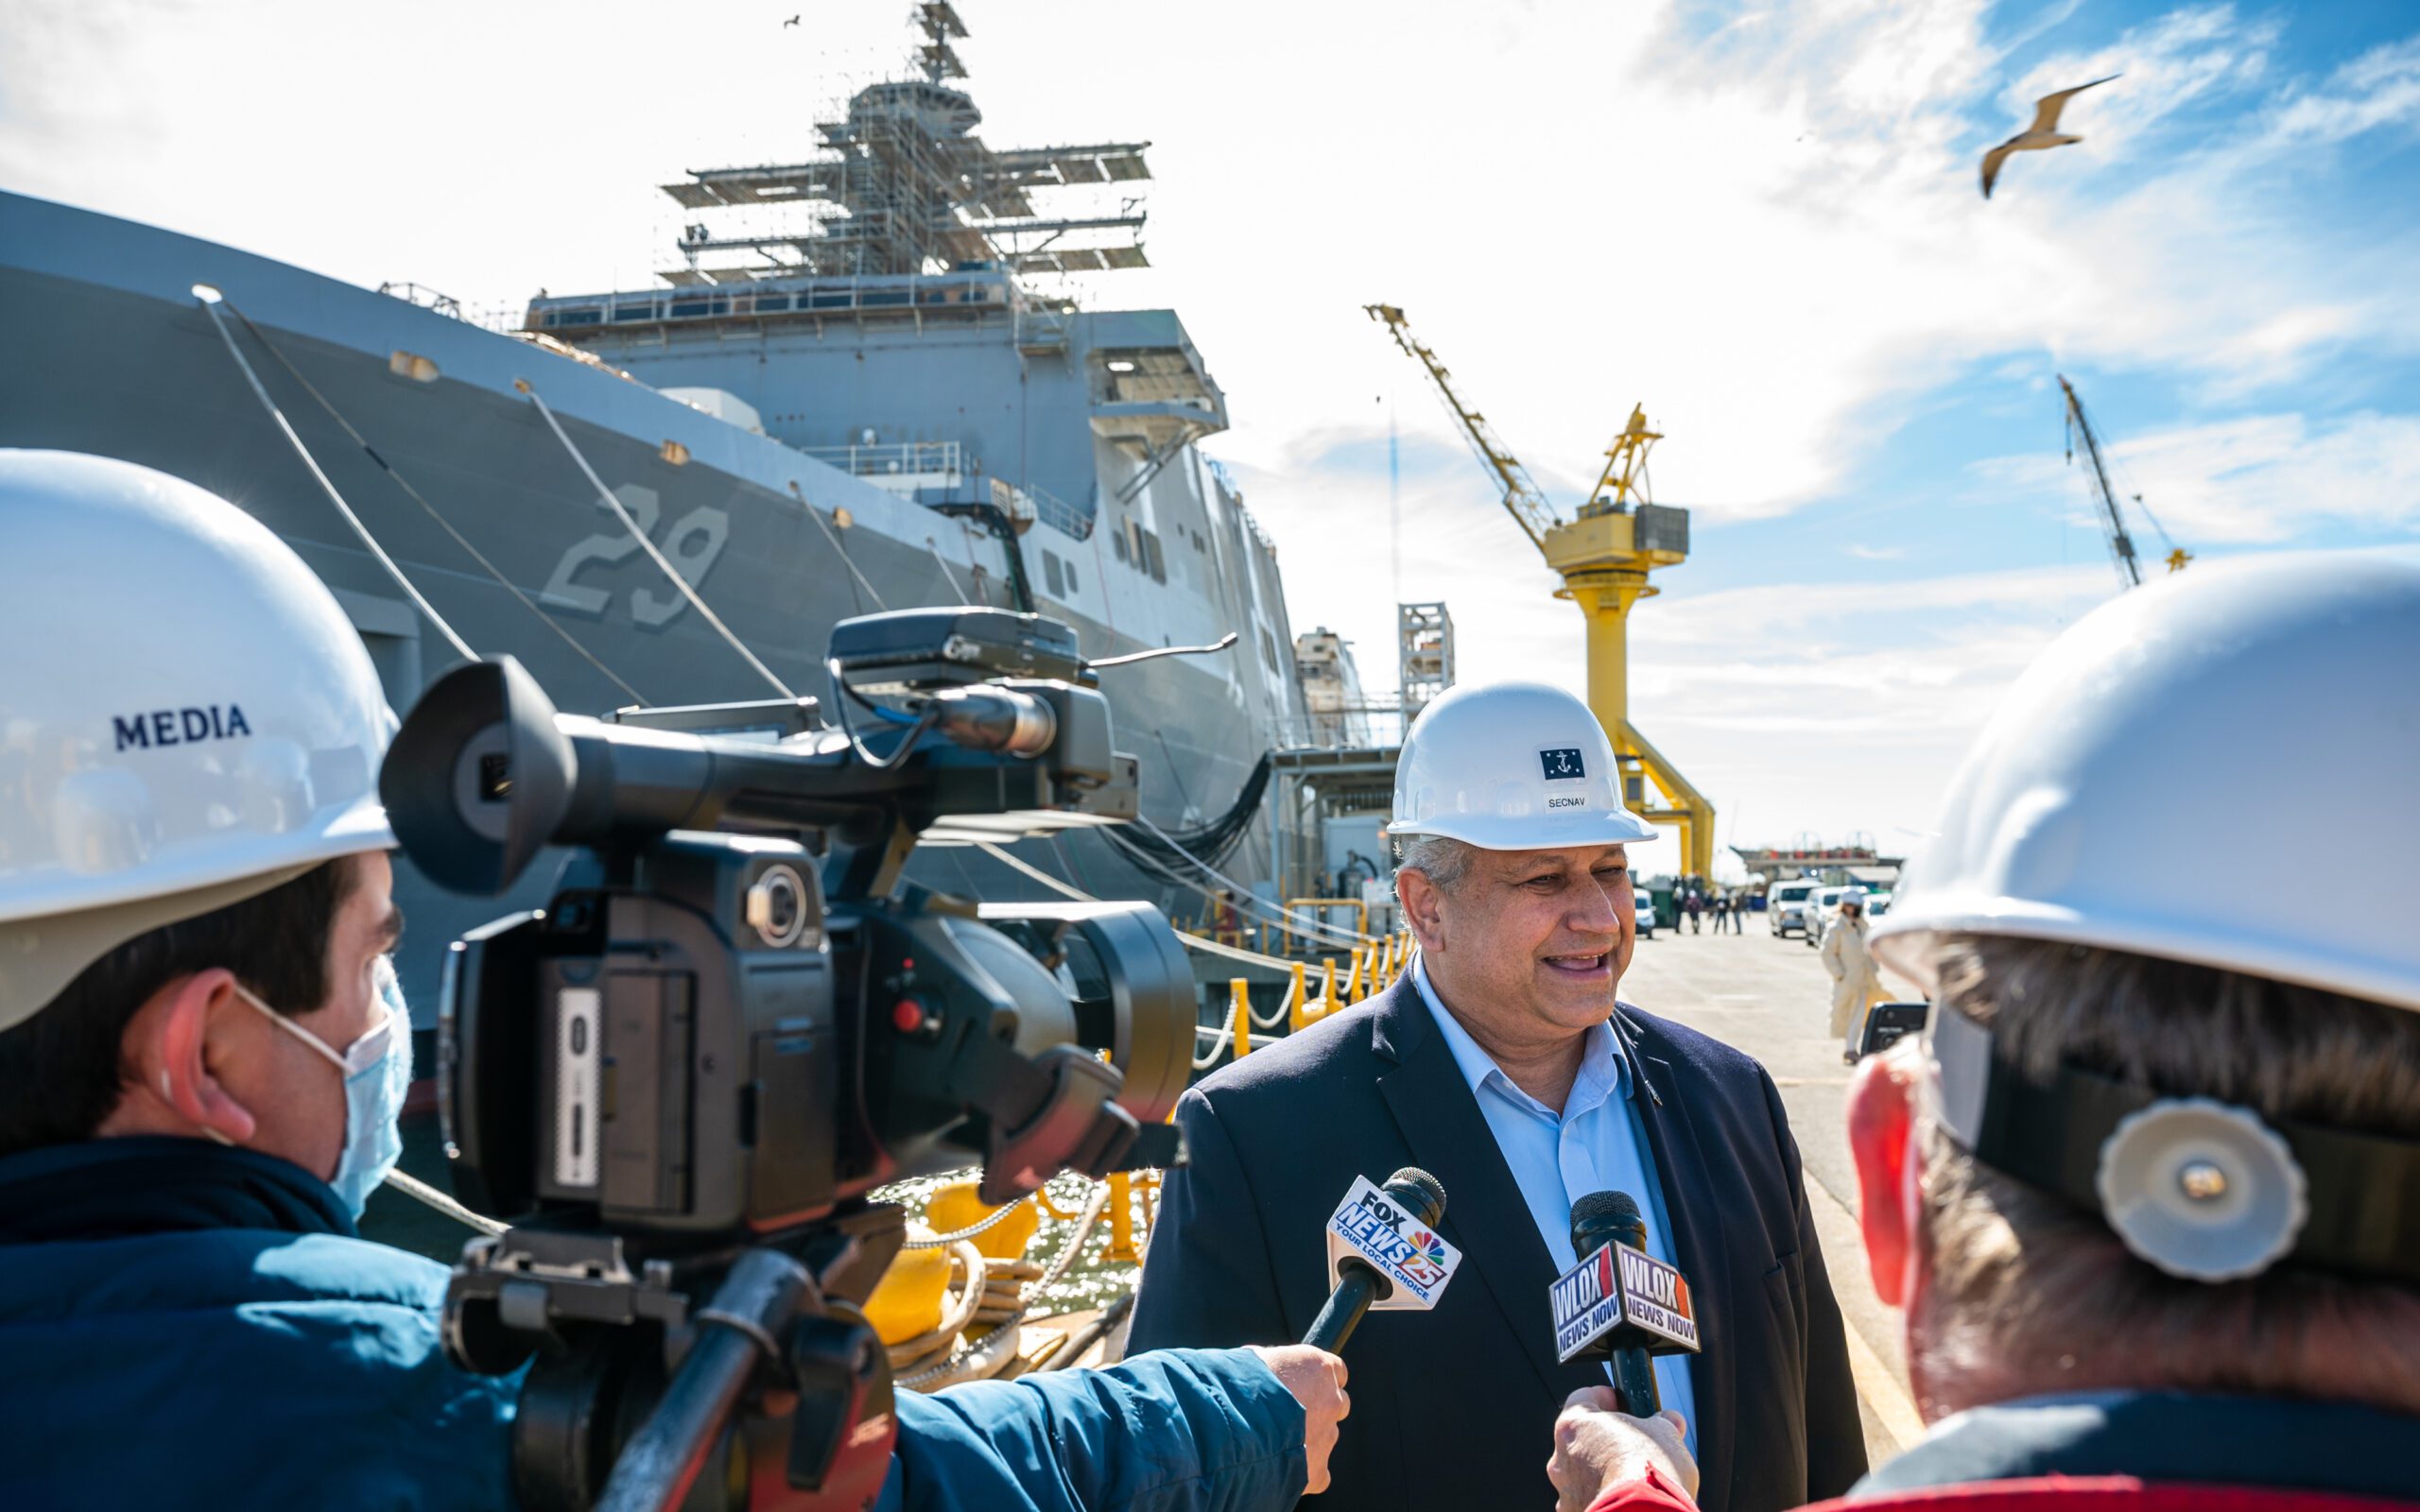 PASCAGOULA, Miss. (Jan 26, 2022) — Secretary of the Navy Carlos Del Toro participates in a media interview during a shipyard tour at Ingalls Shipbuilding in Pascagoula, Miss., Jan. 26, 2022. U.S. Navy Photo